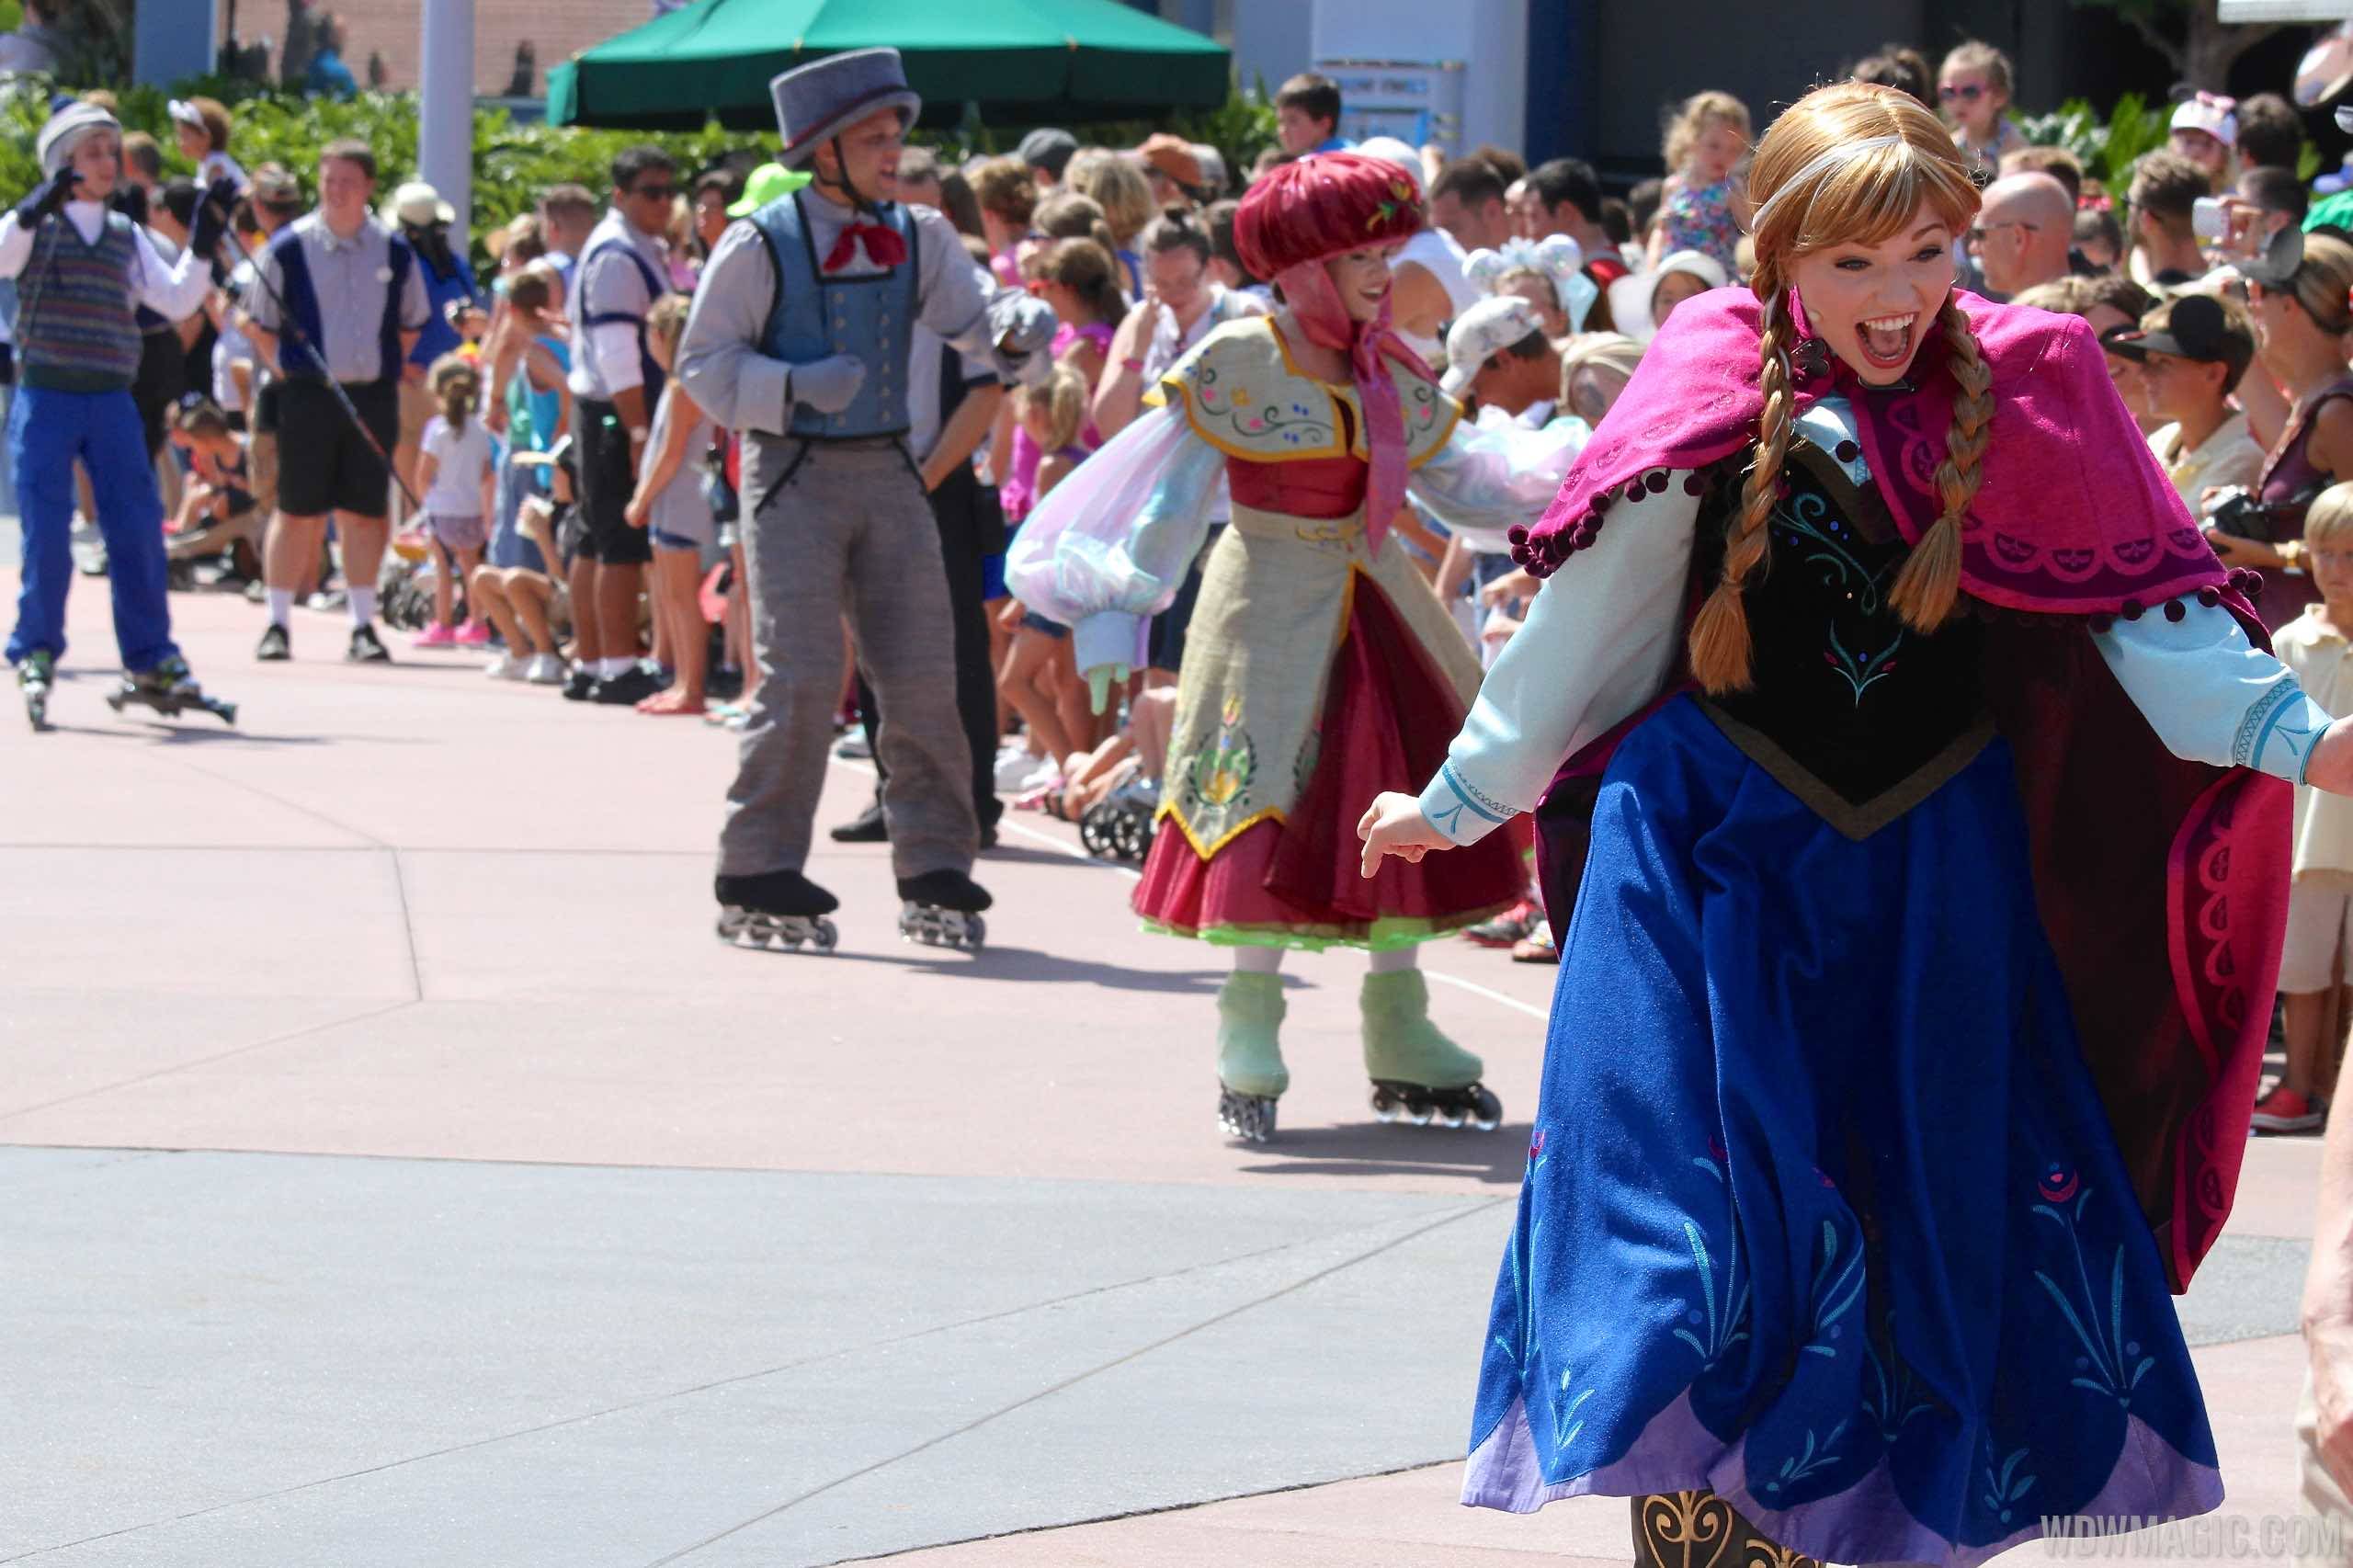 Frozen Royal Welcome 2015 - Anna greets guests